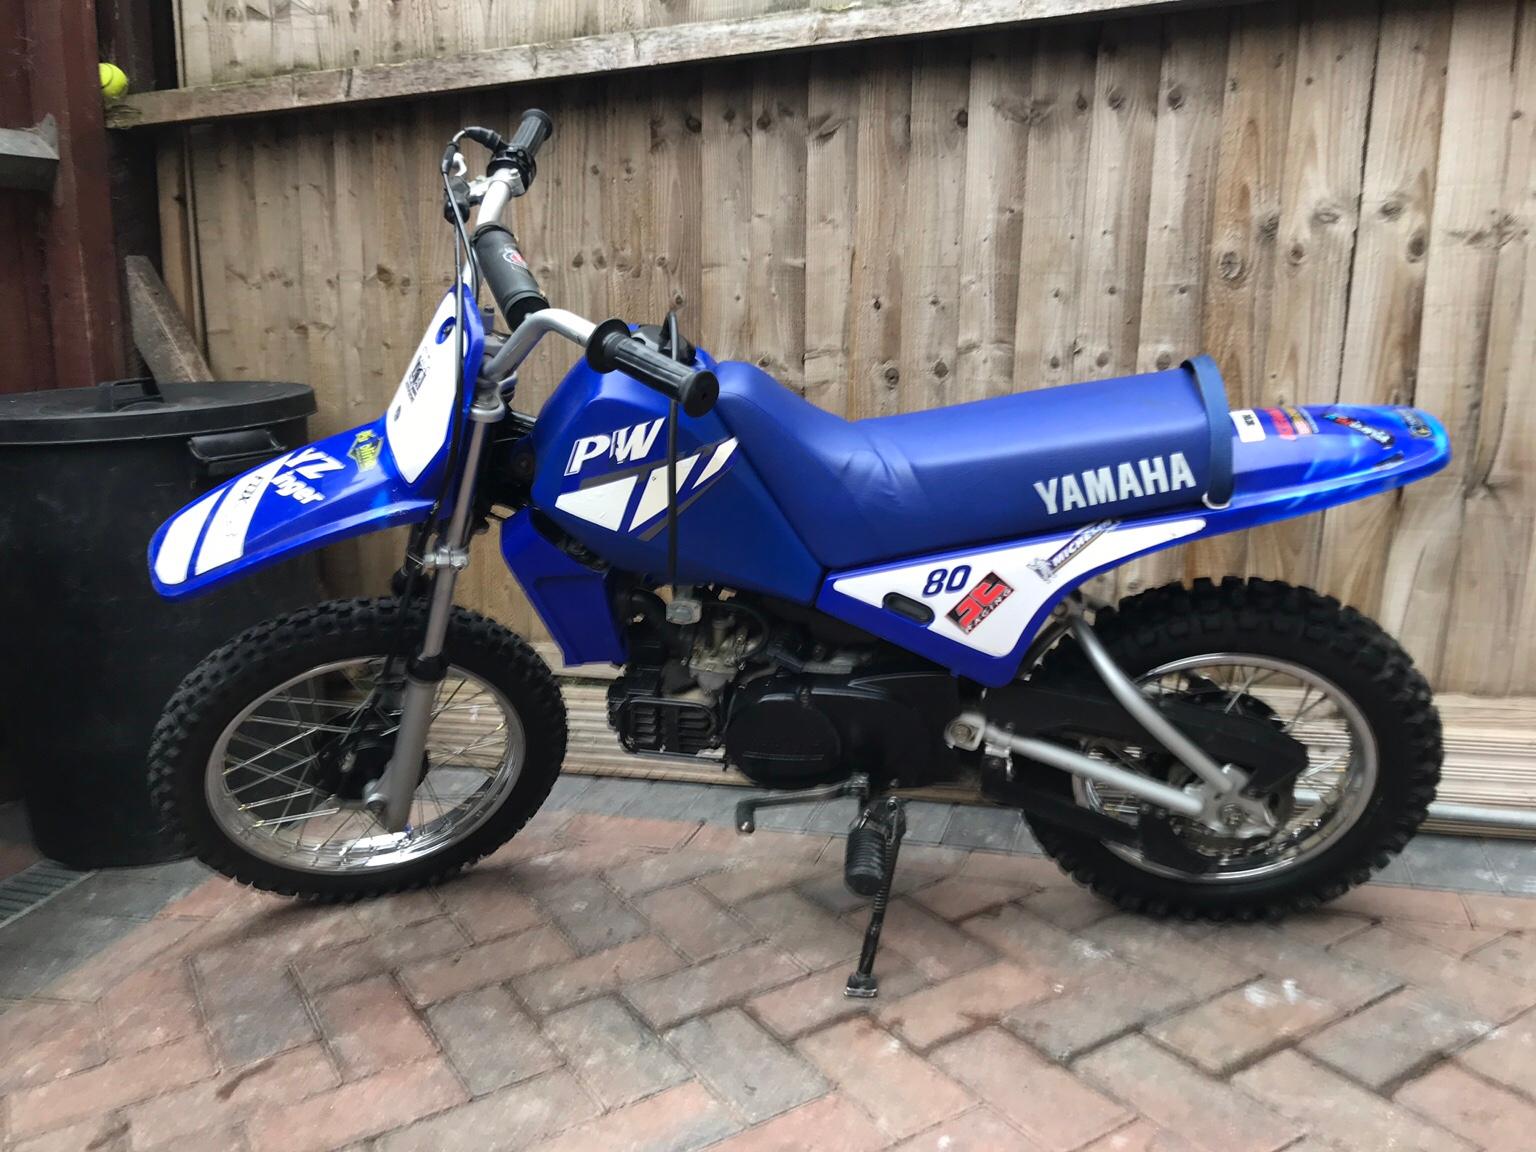 Yamaha pw80 in E3 London for £650.00 